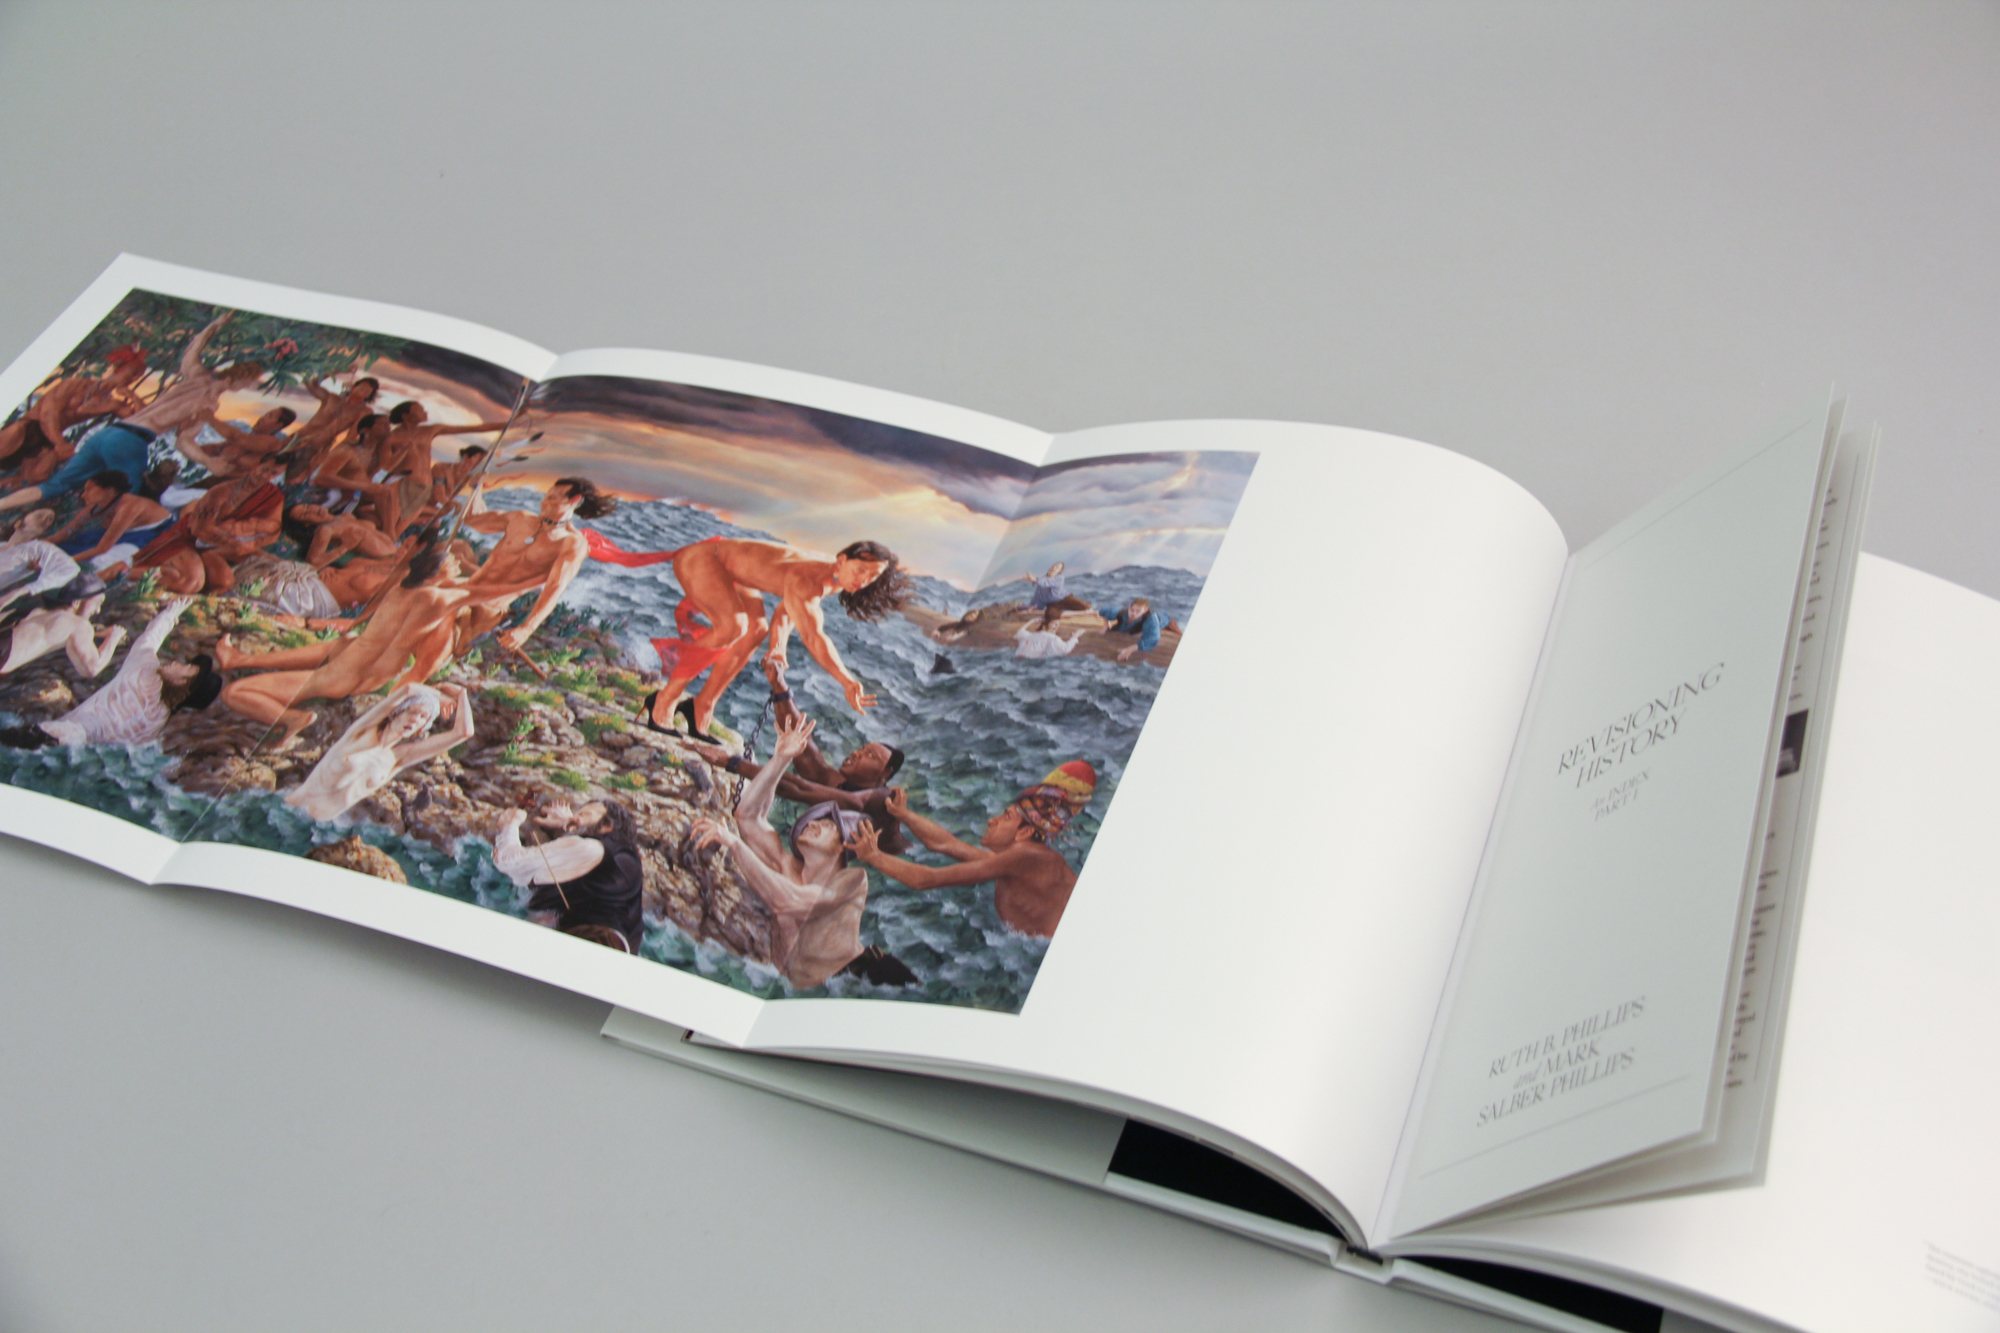 Kent Monkman: Revision and Resistance Product Image 4 of 7